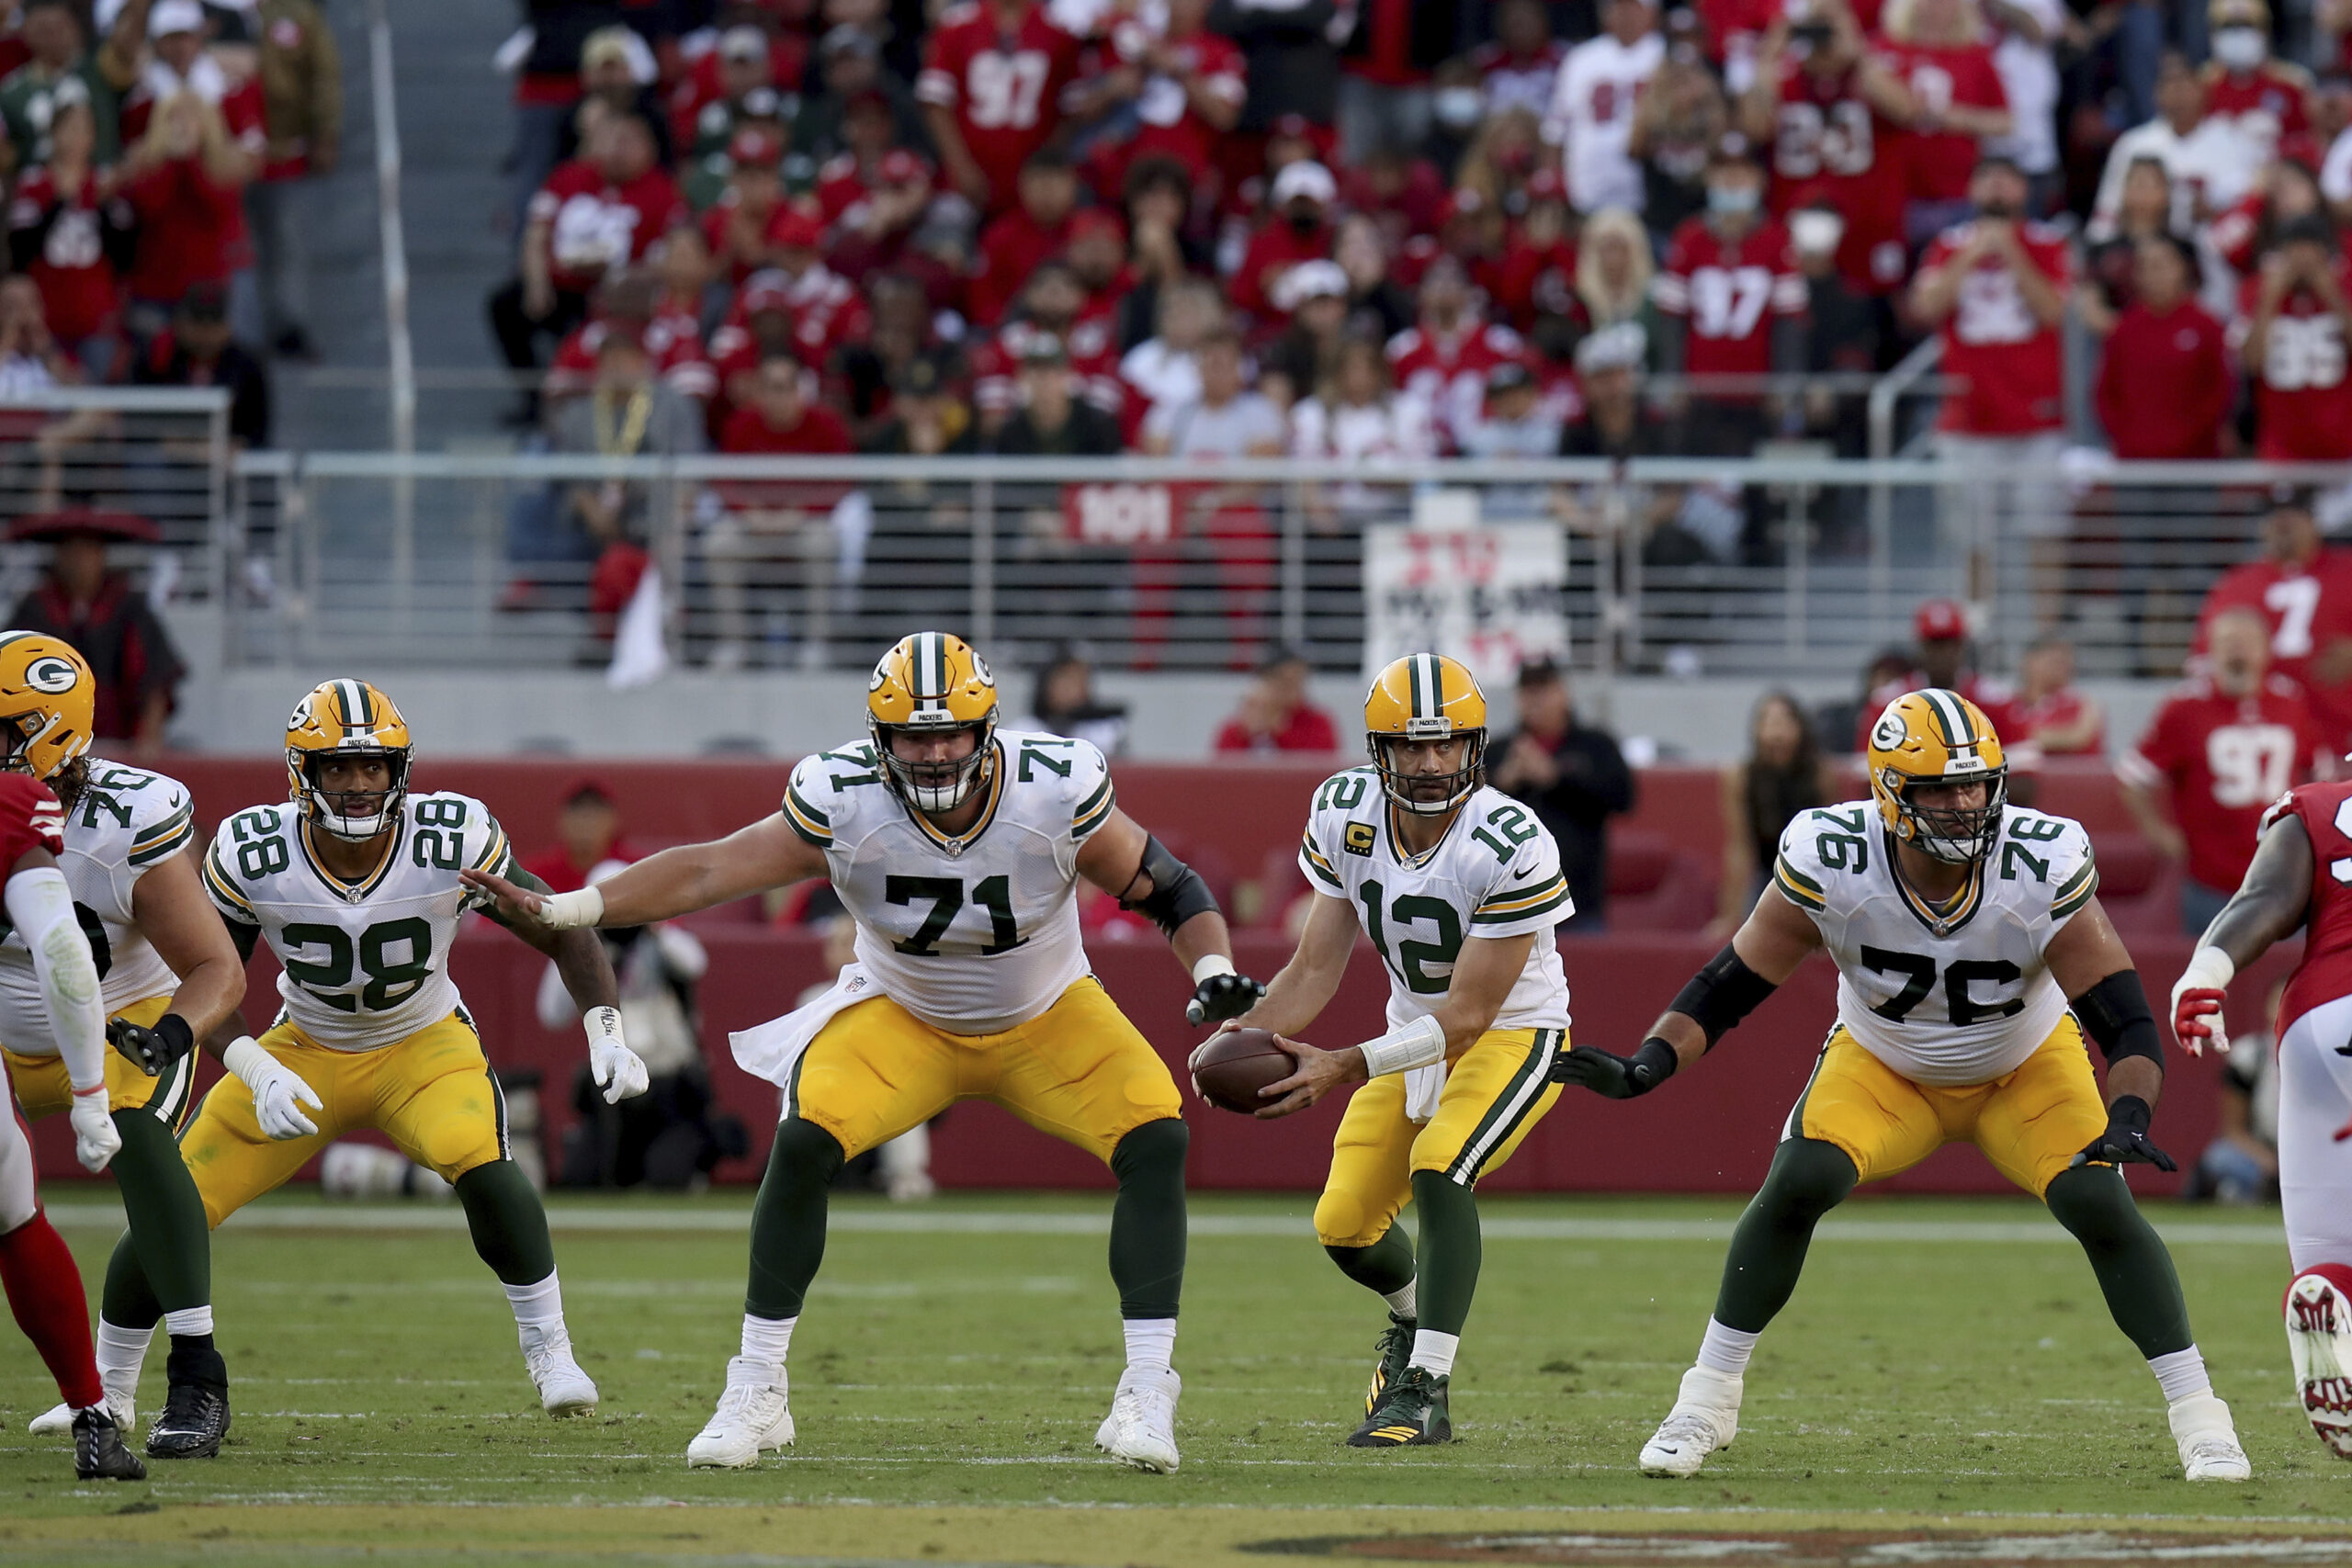 Green Bay Packers' Aaron Rodgers receives the snap during an NFL football game against the San Francisco 49ers